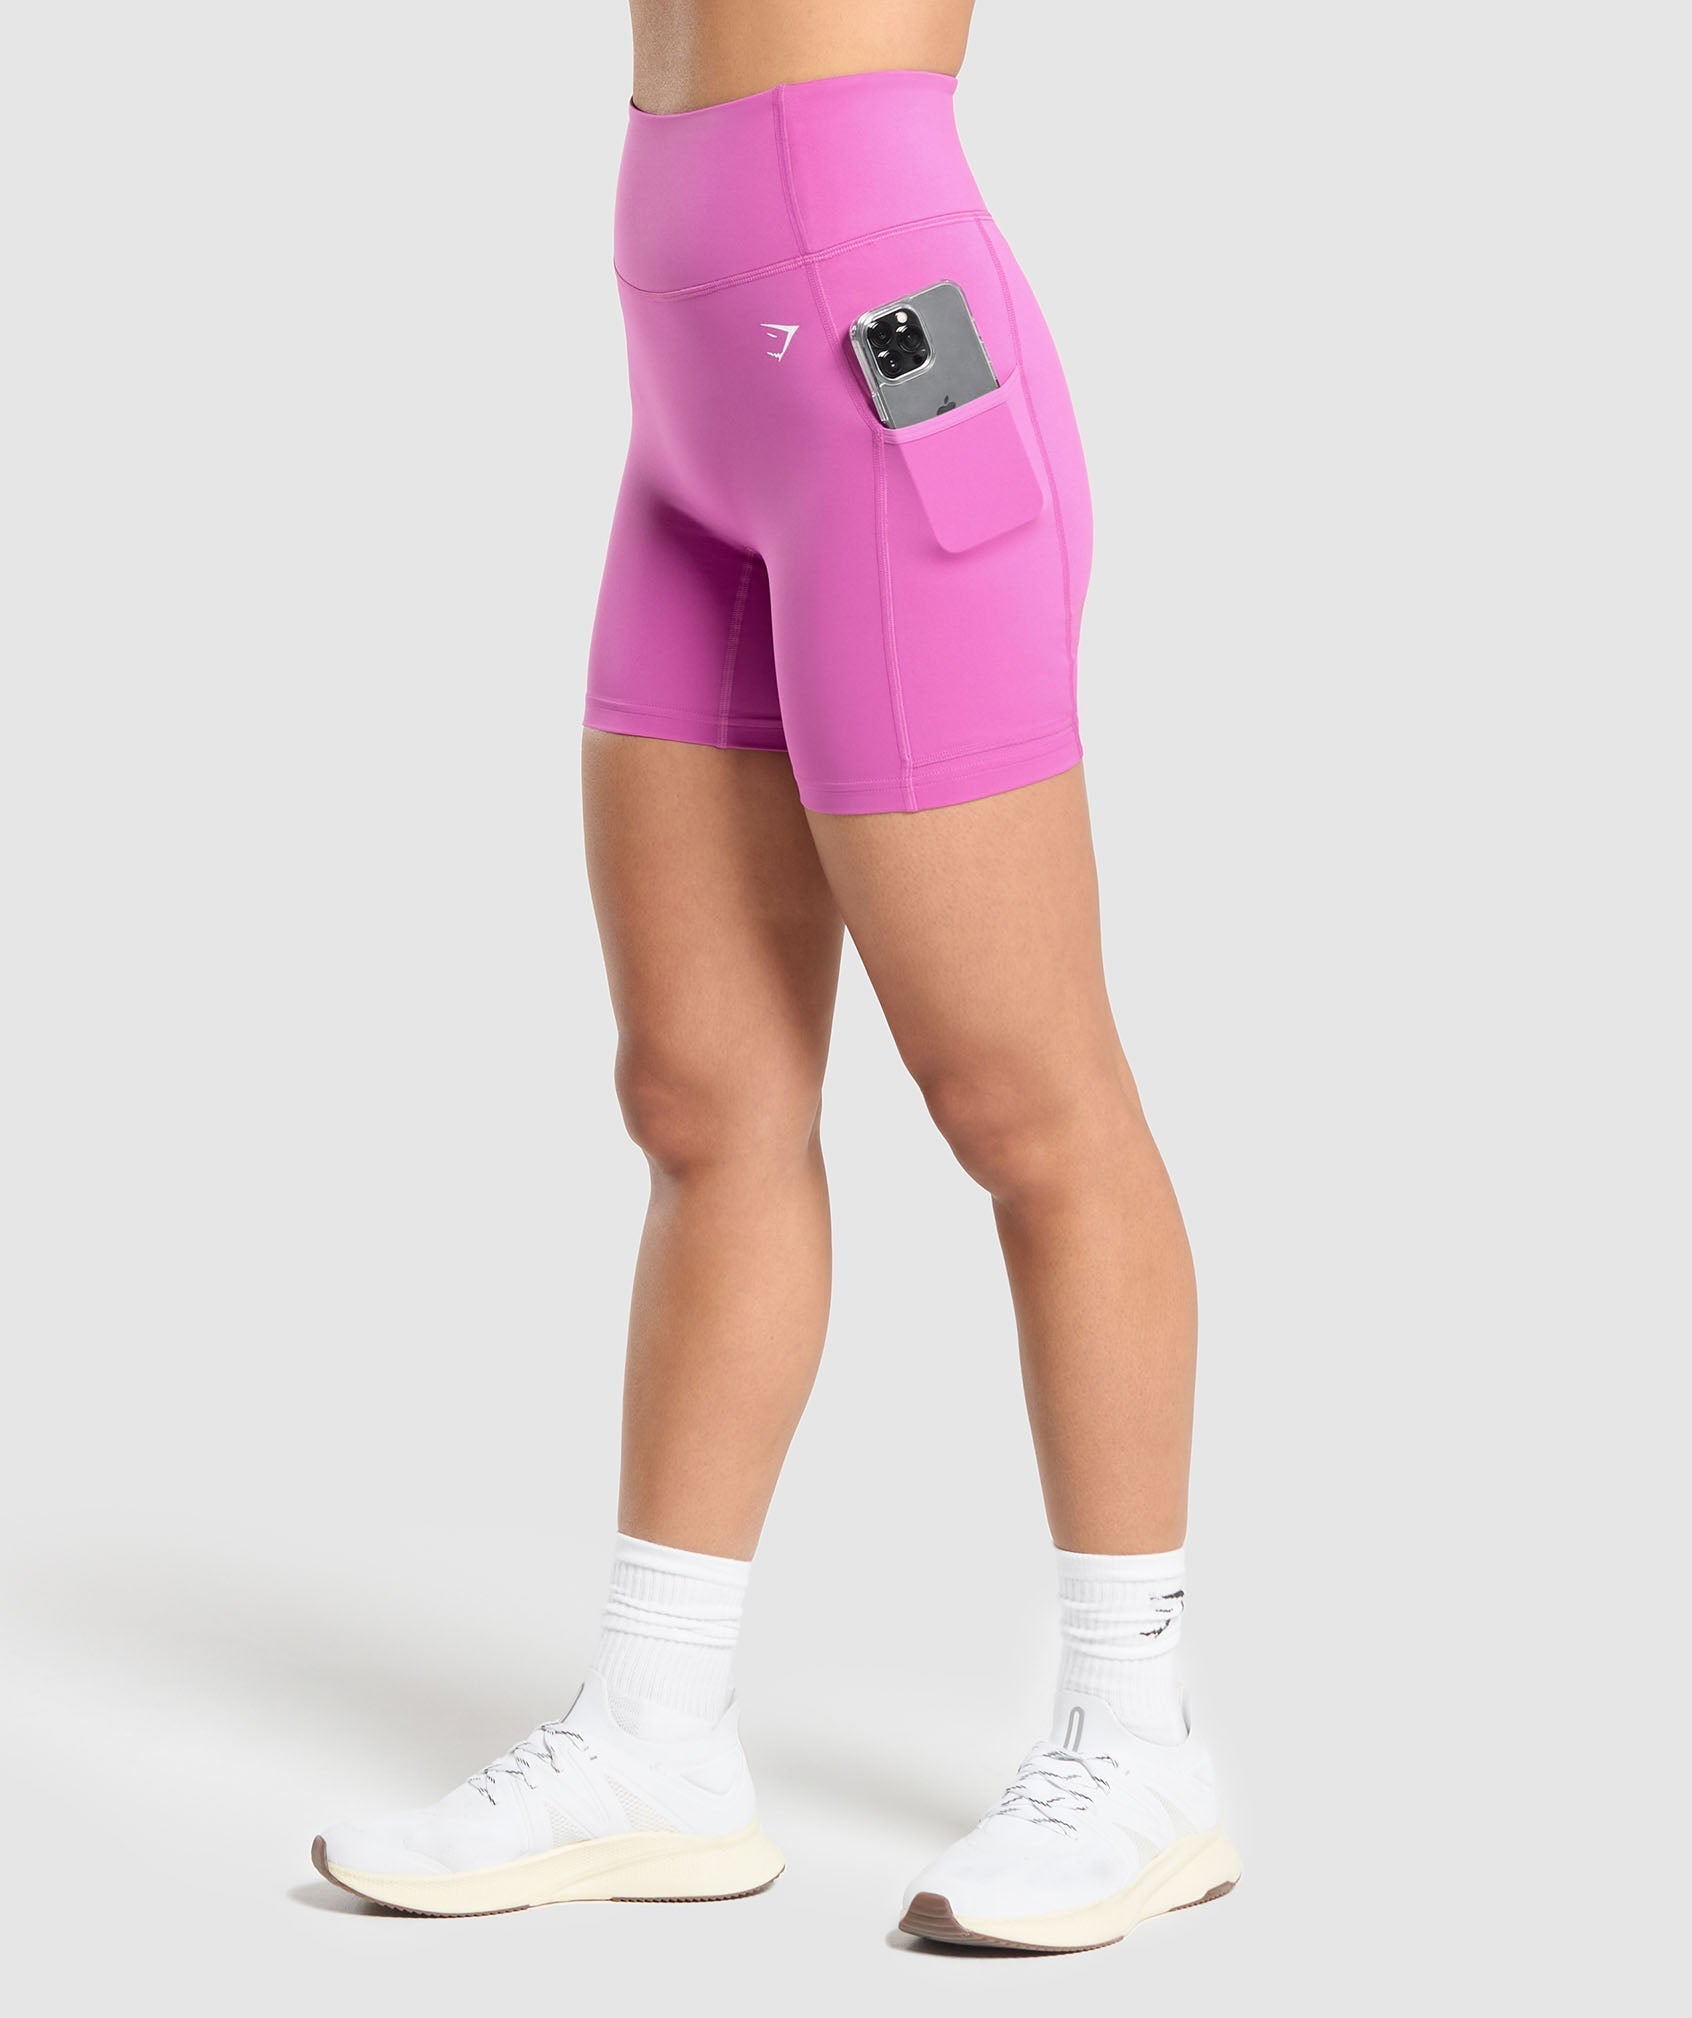 Pockets Shorts in Shelly Pink